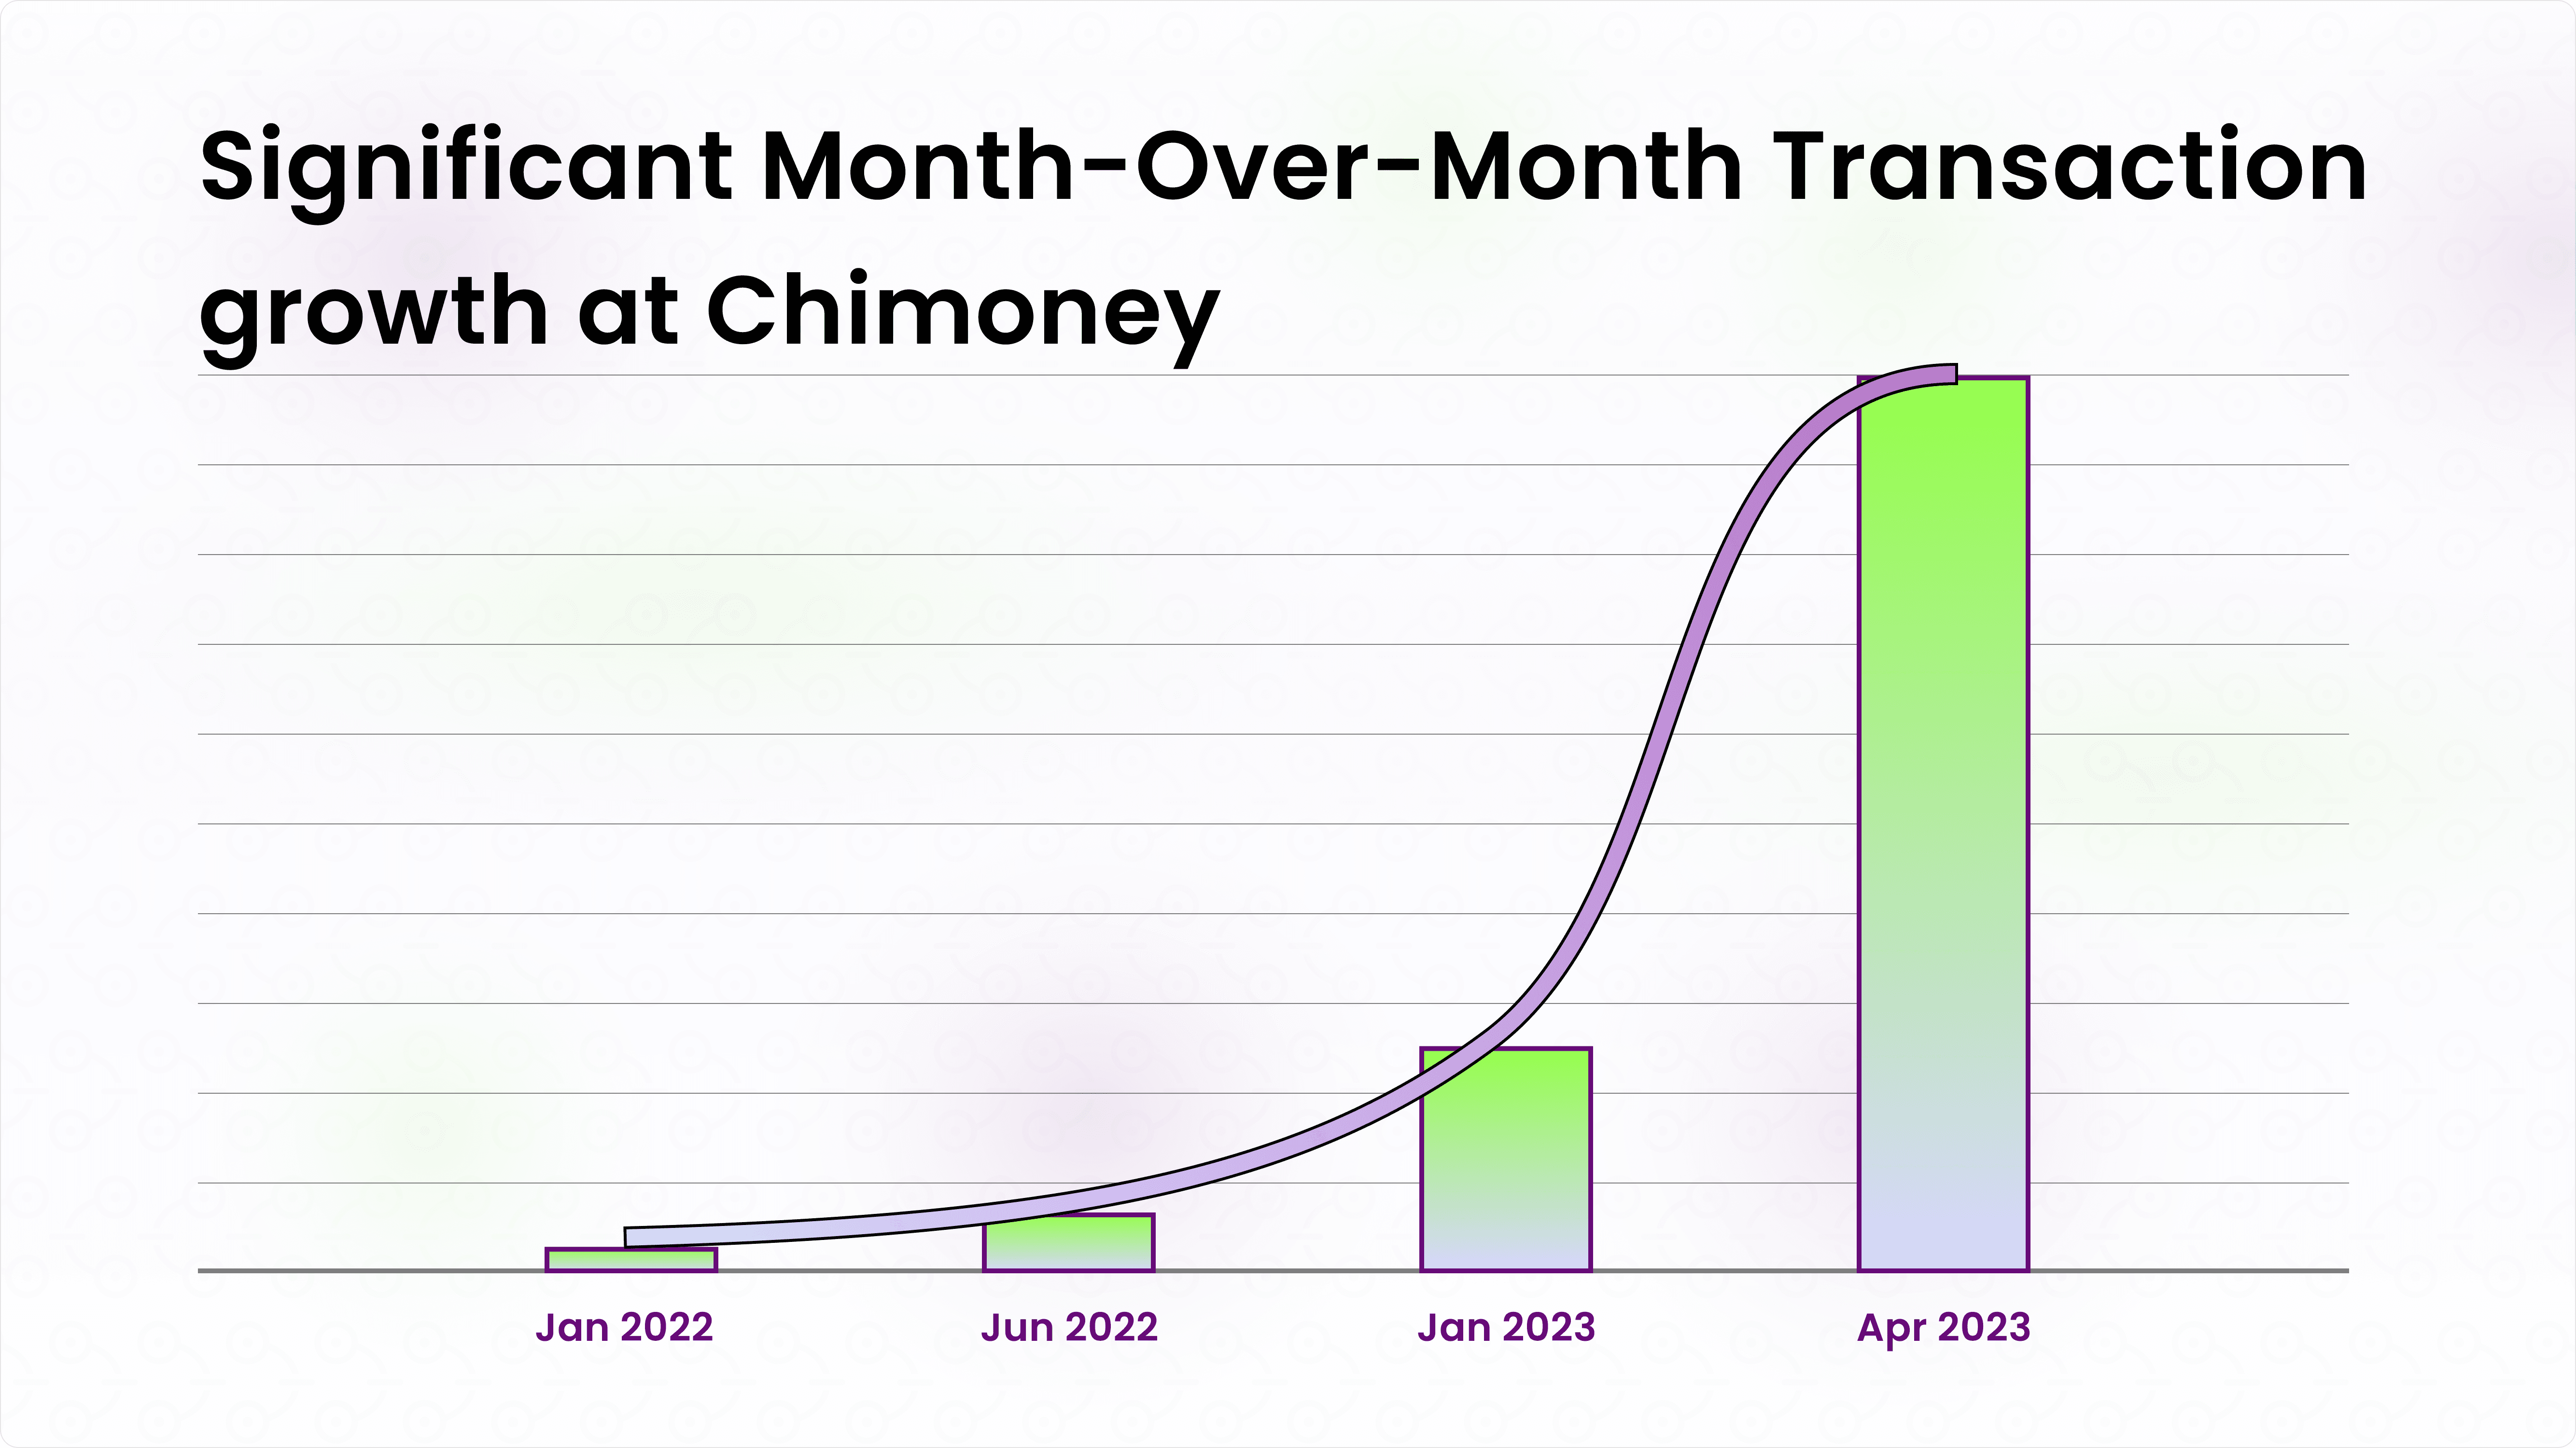 Chimoney month-over-month growth.png